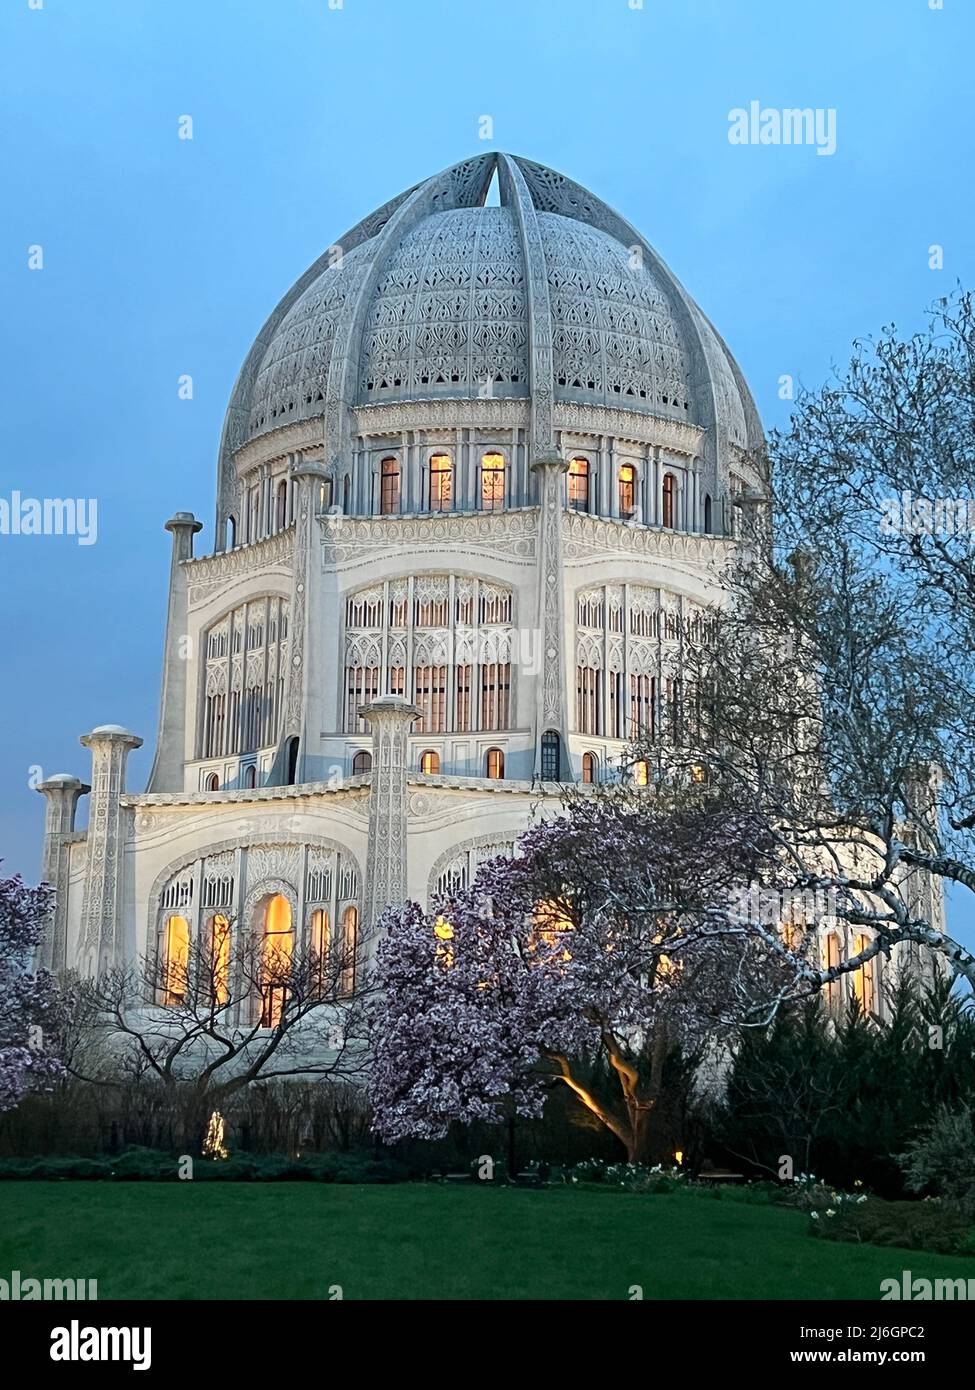 Baha'i House of Worship on an early spring evening with flowering trees in bloom. The temple is located in Wilmette, Illinois. Stock Photo